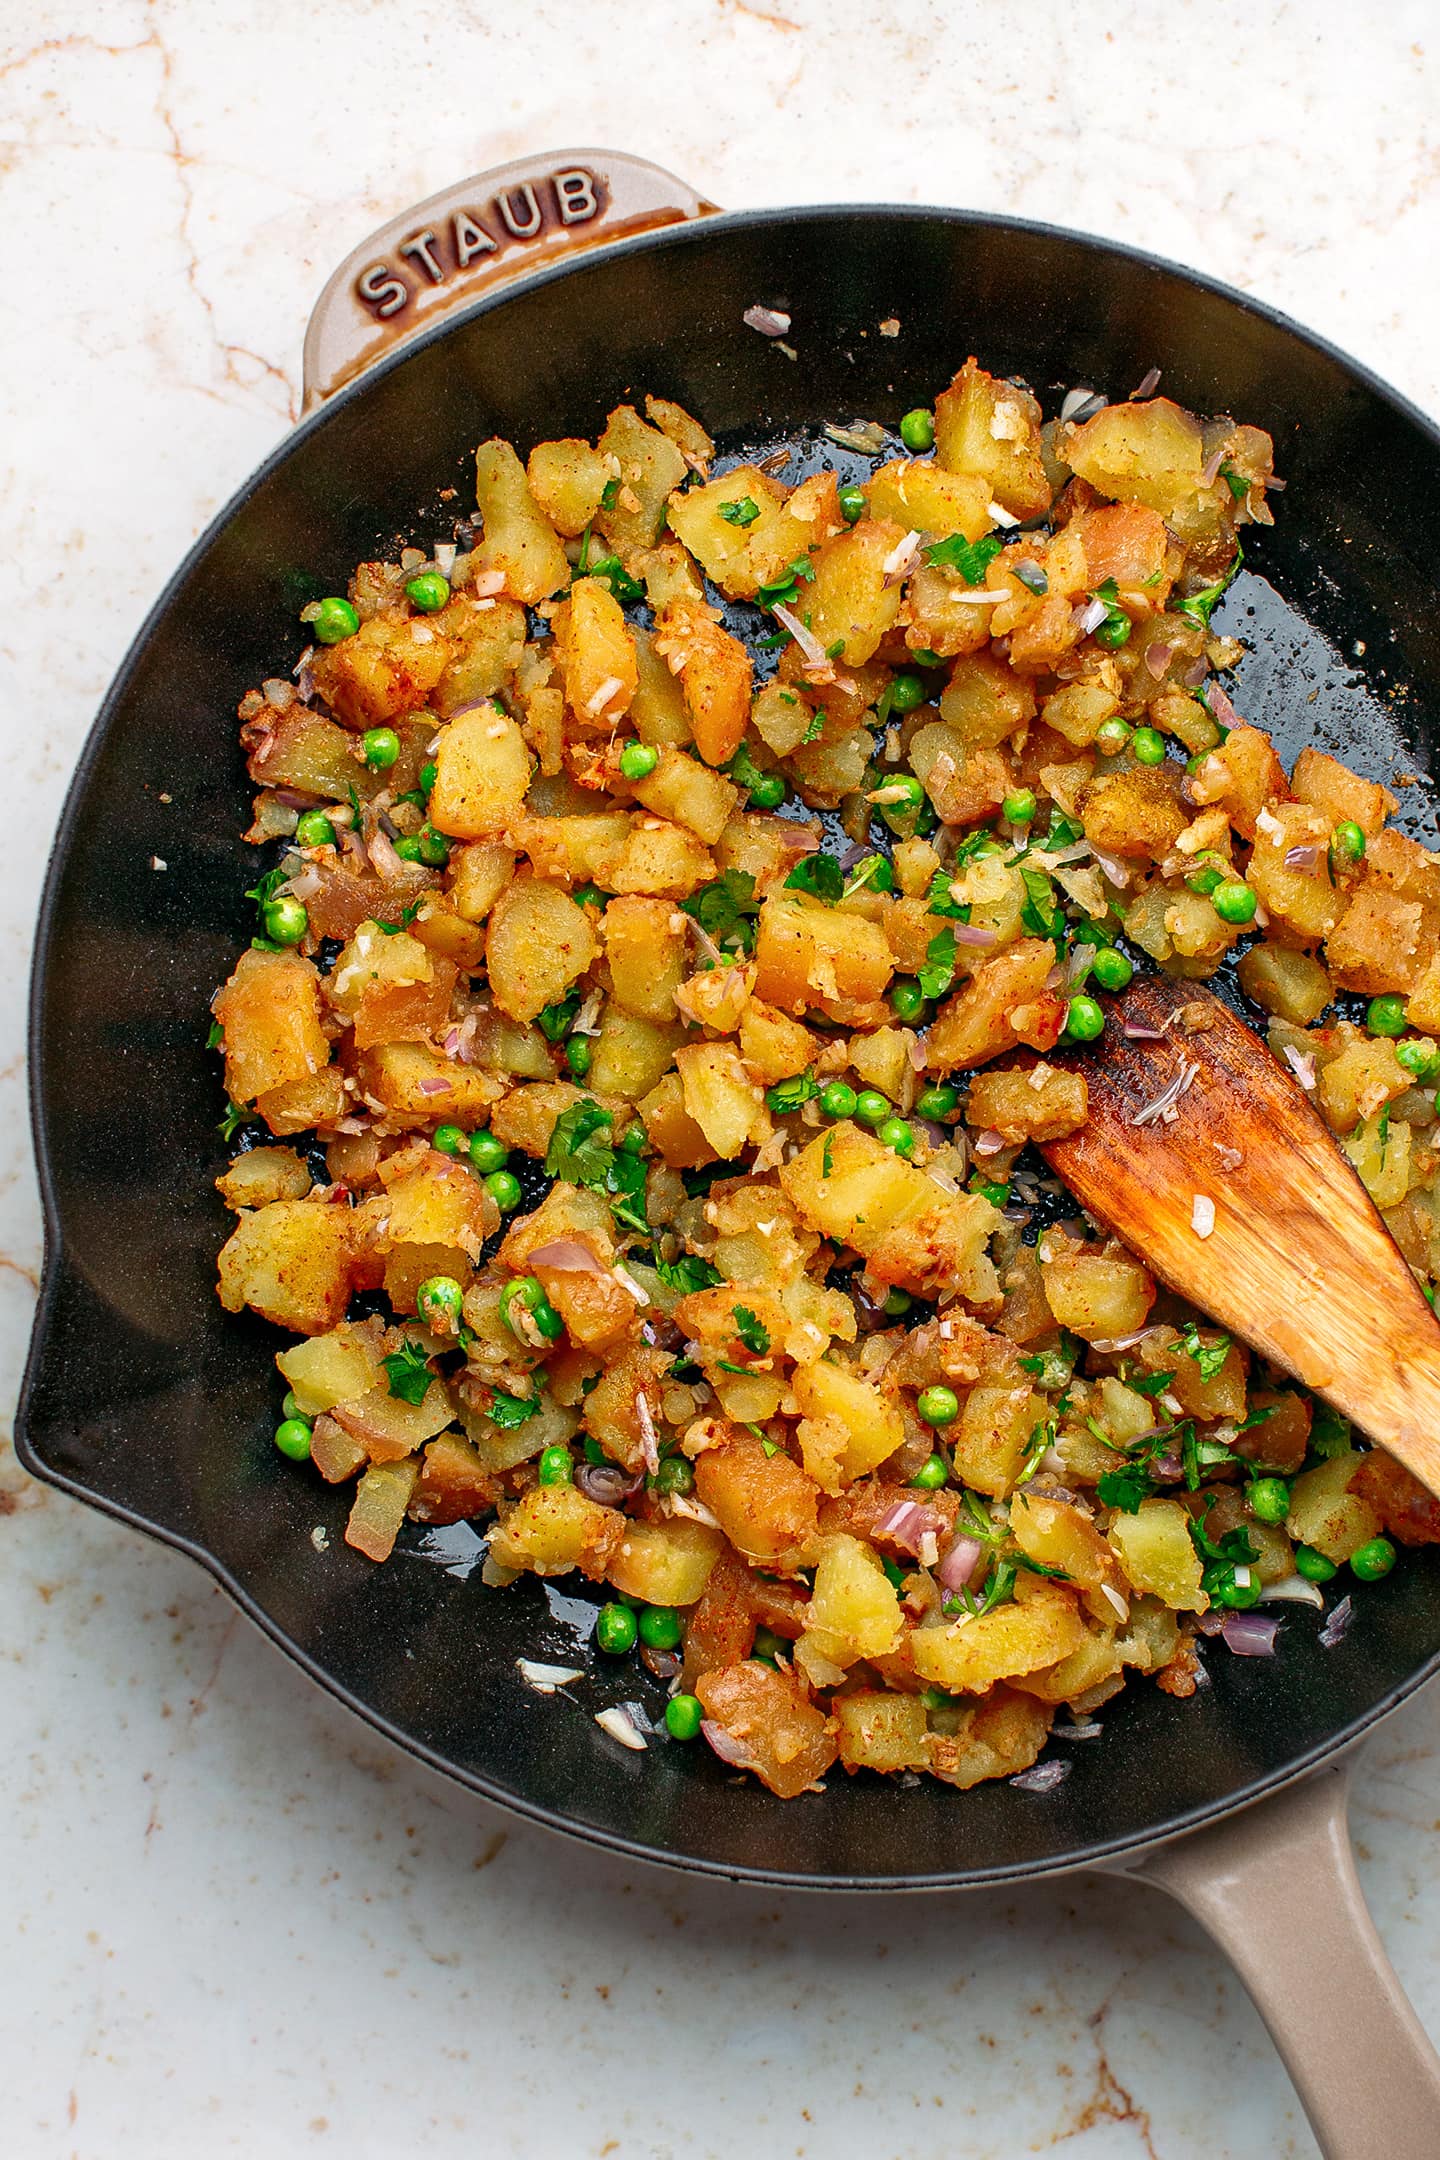 Sautéed potatoes with green peas and cilantro in a skillet.